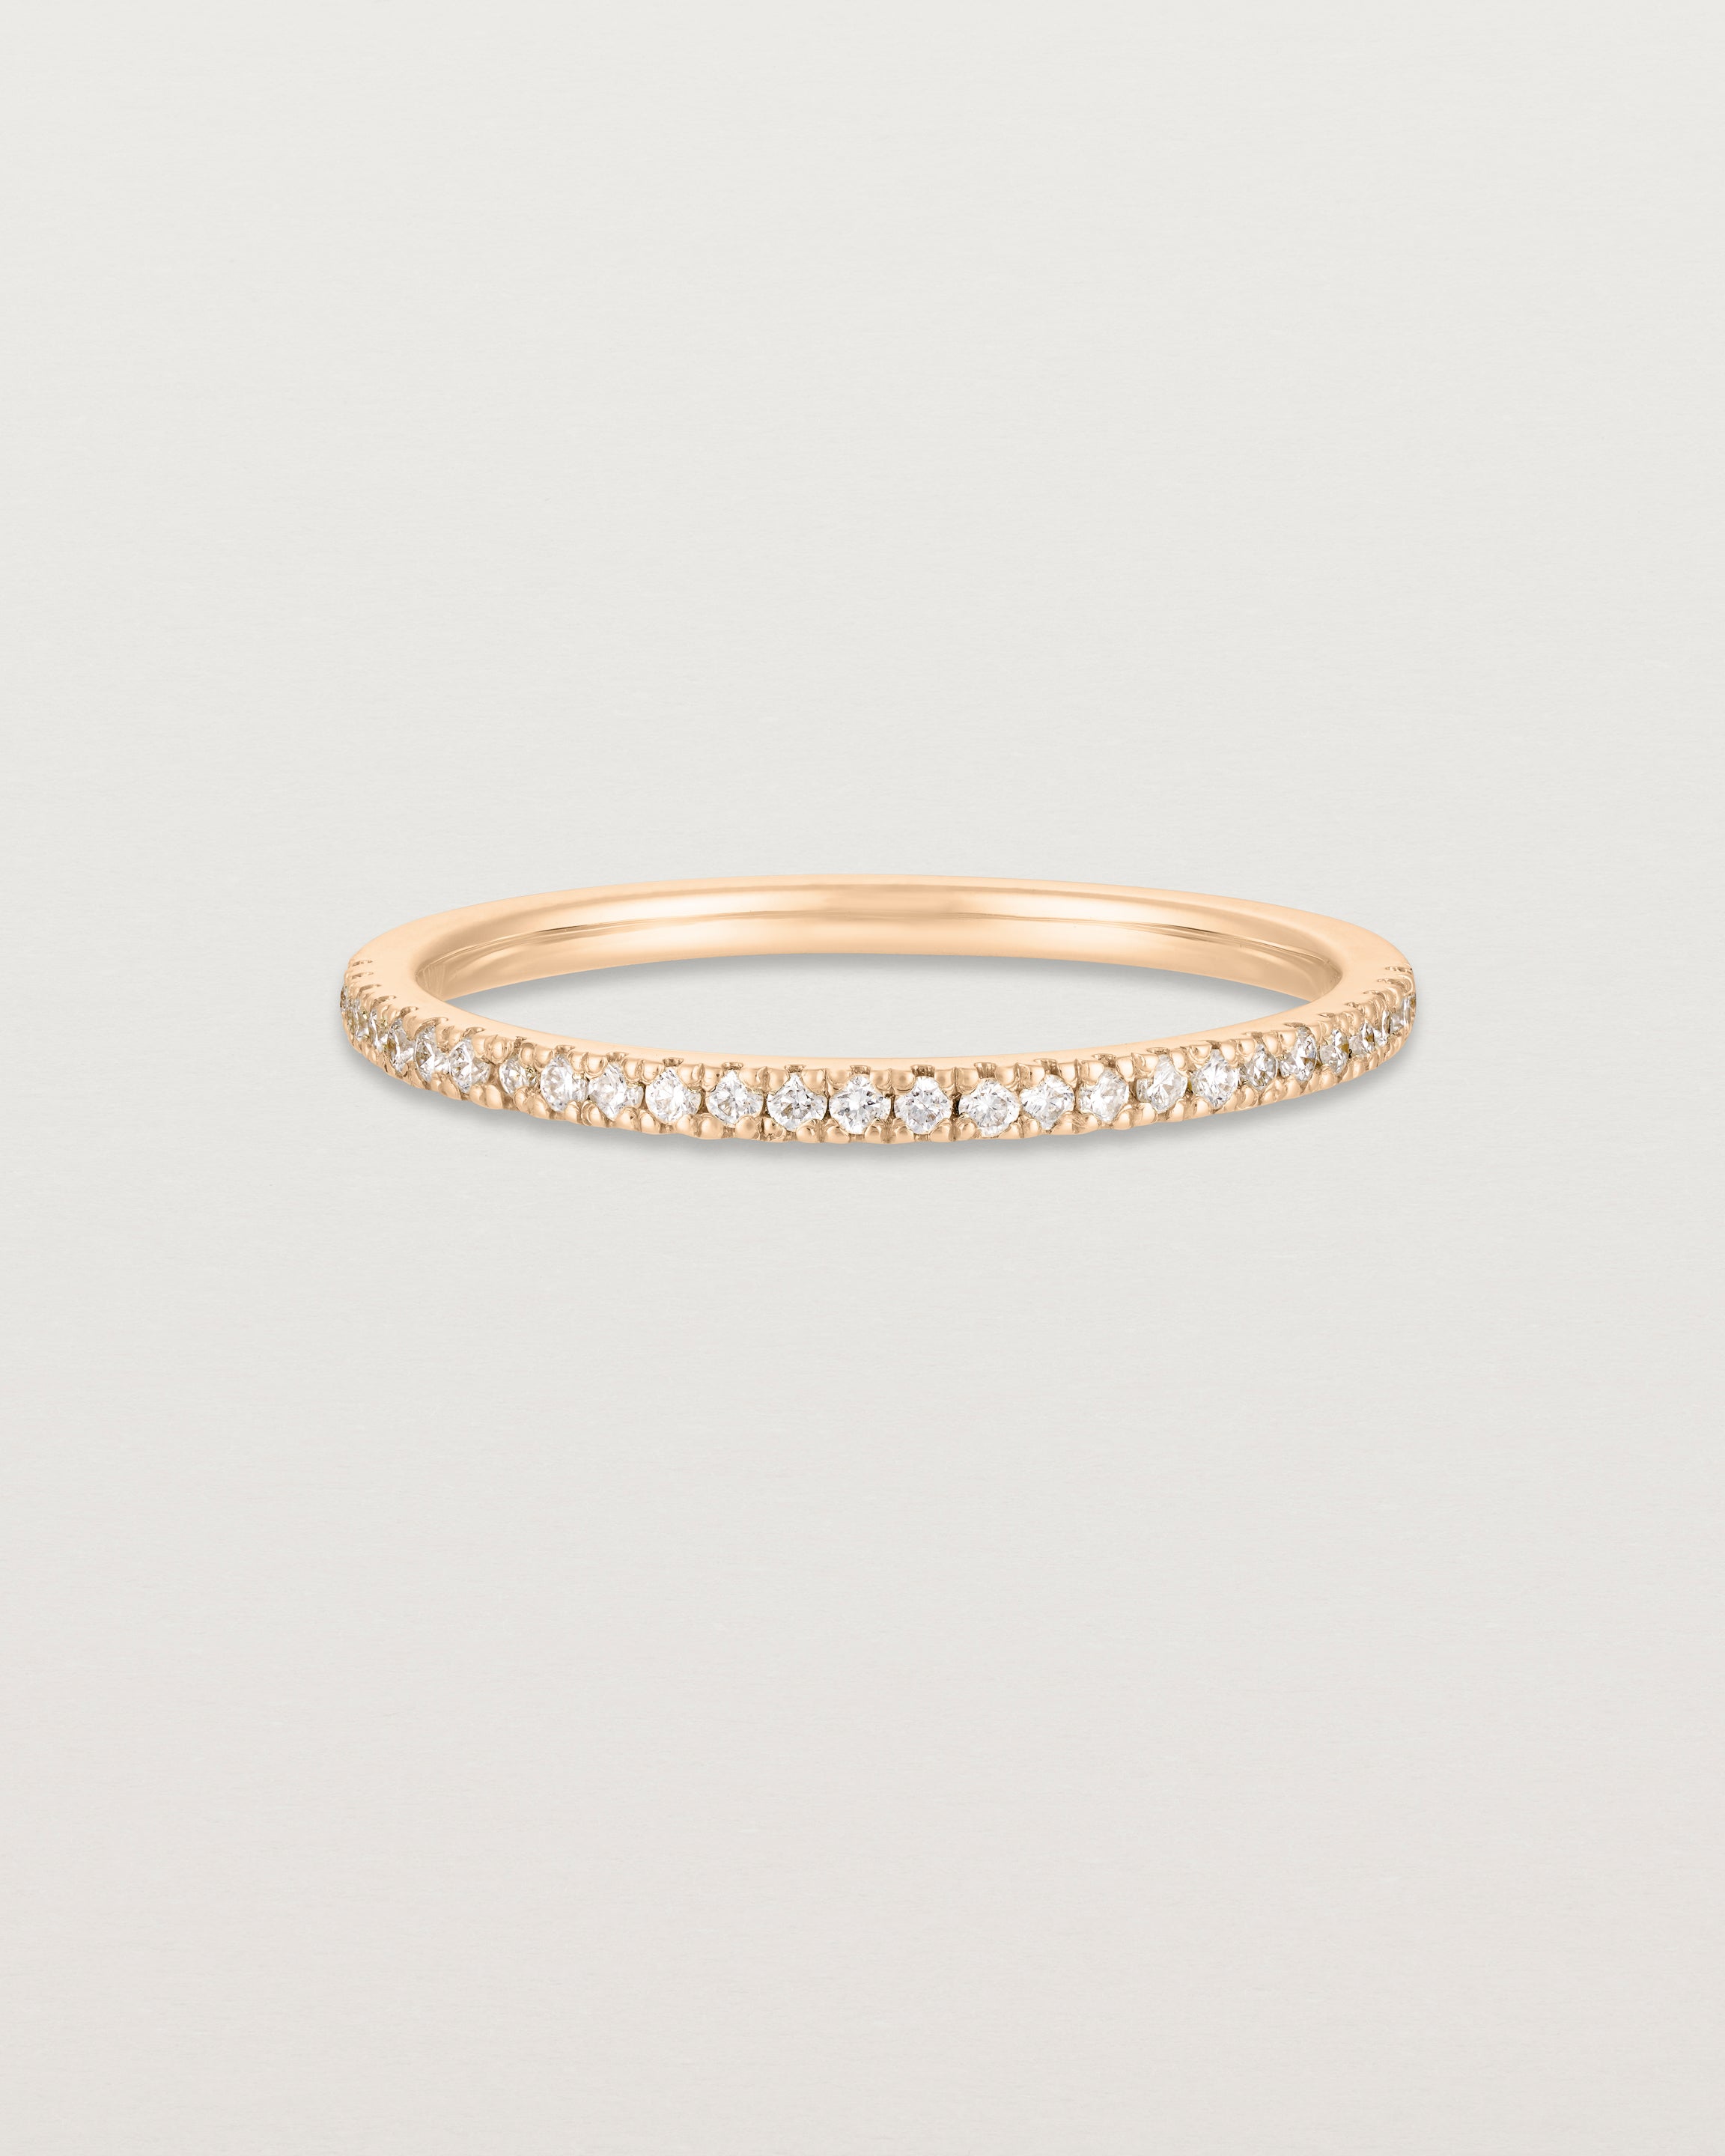 Front view of the Demi Queenie | White Diamonds in rose gold.